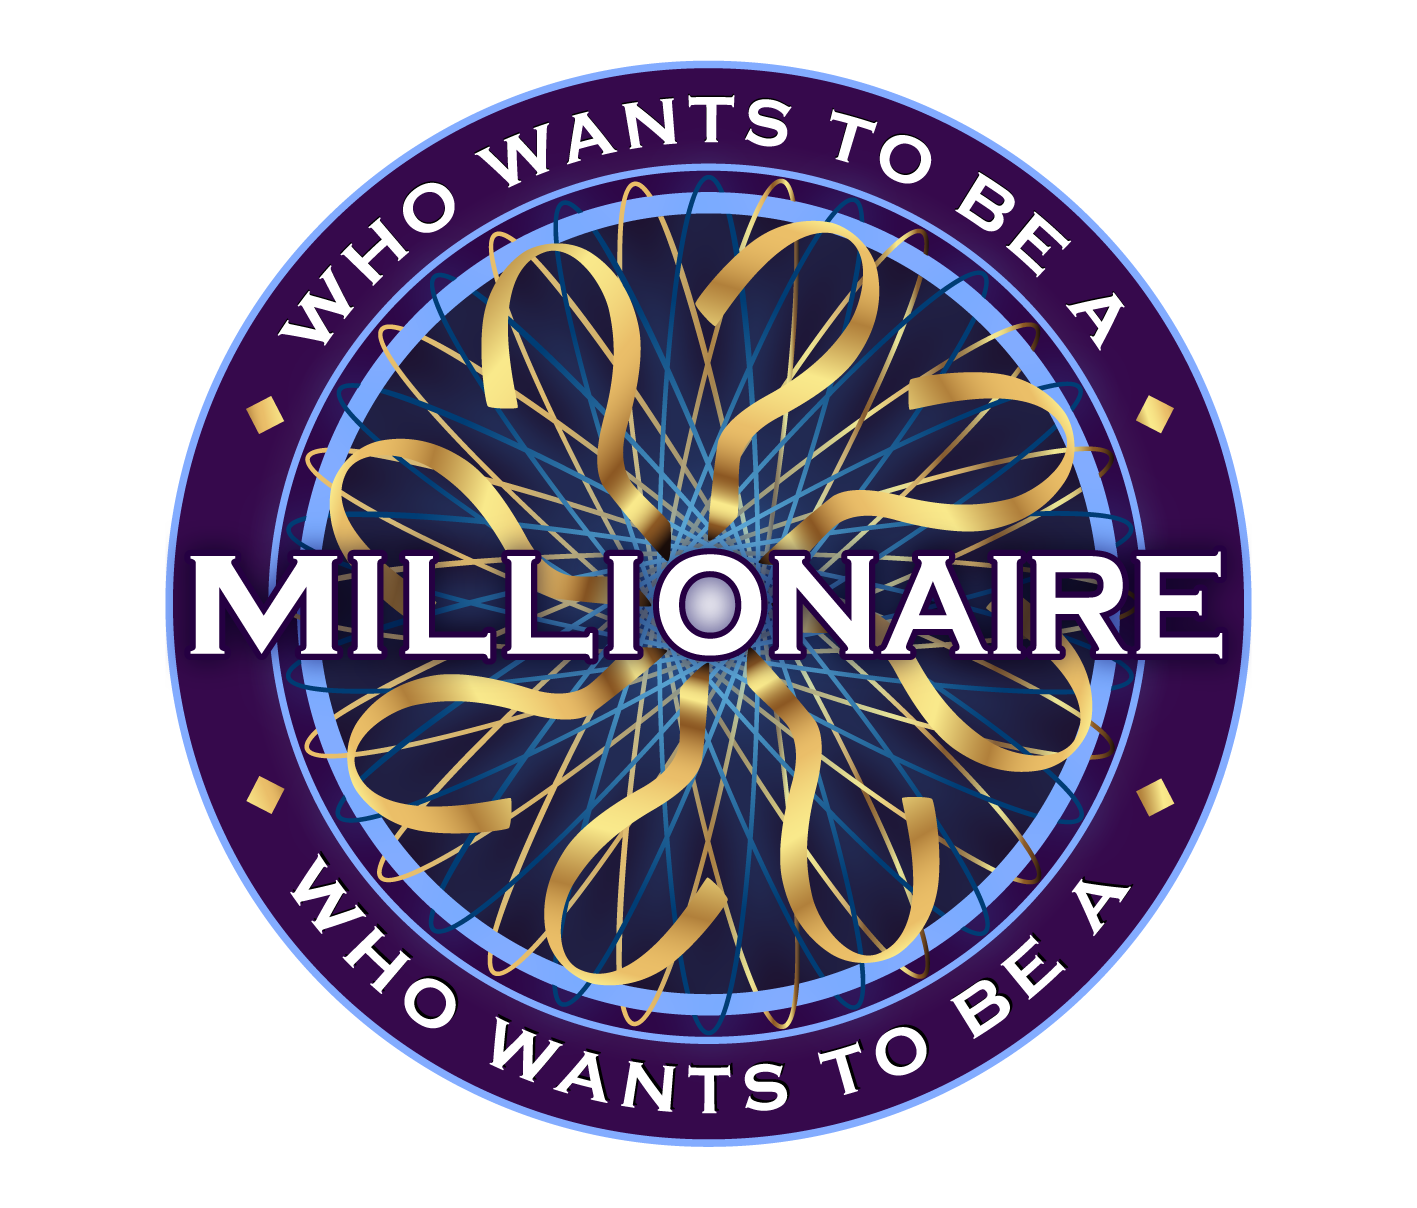 ‘Who Wants To Be A Millionaire?’ Game show is back, bigger and better!